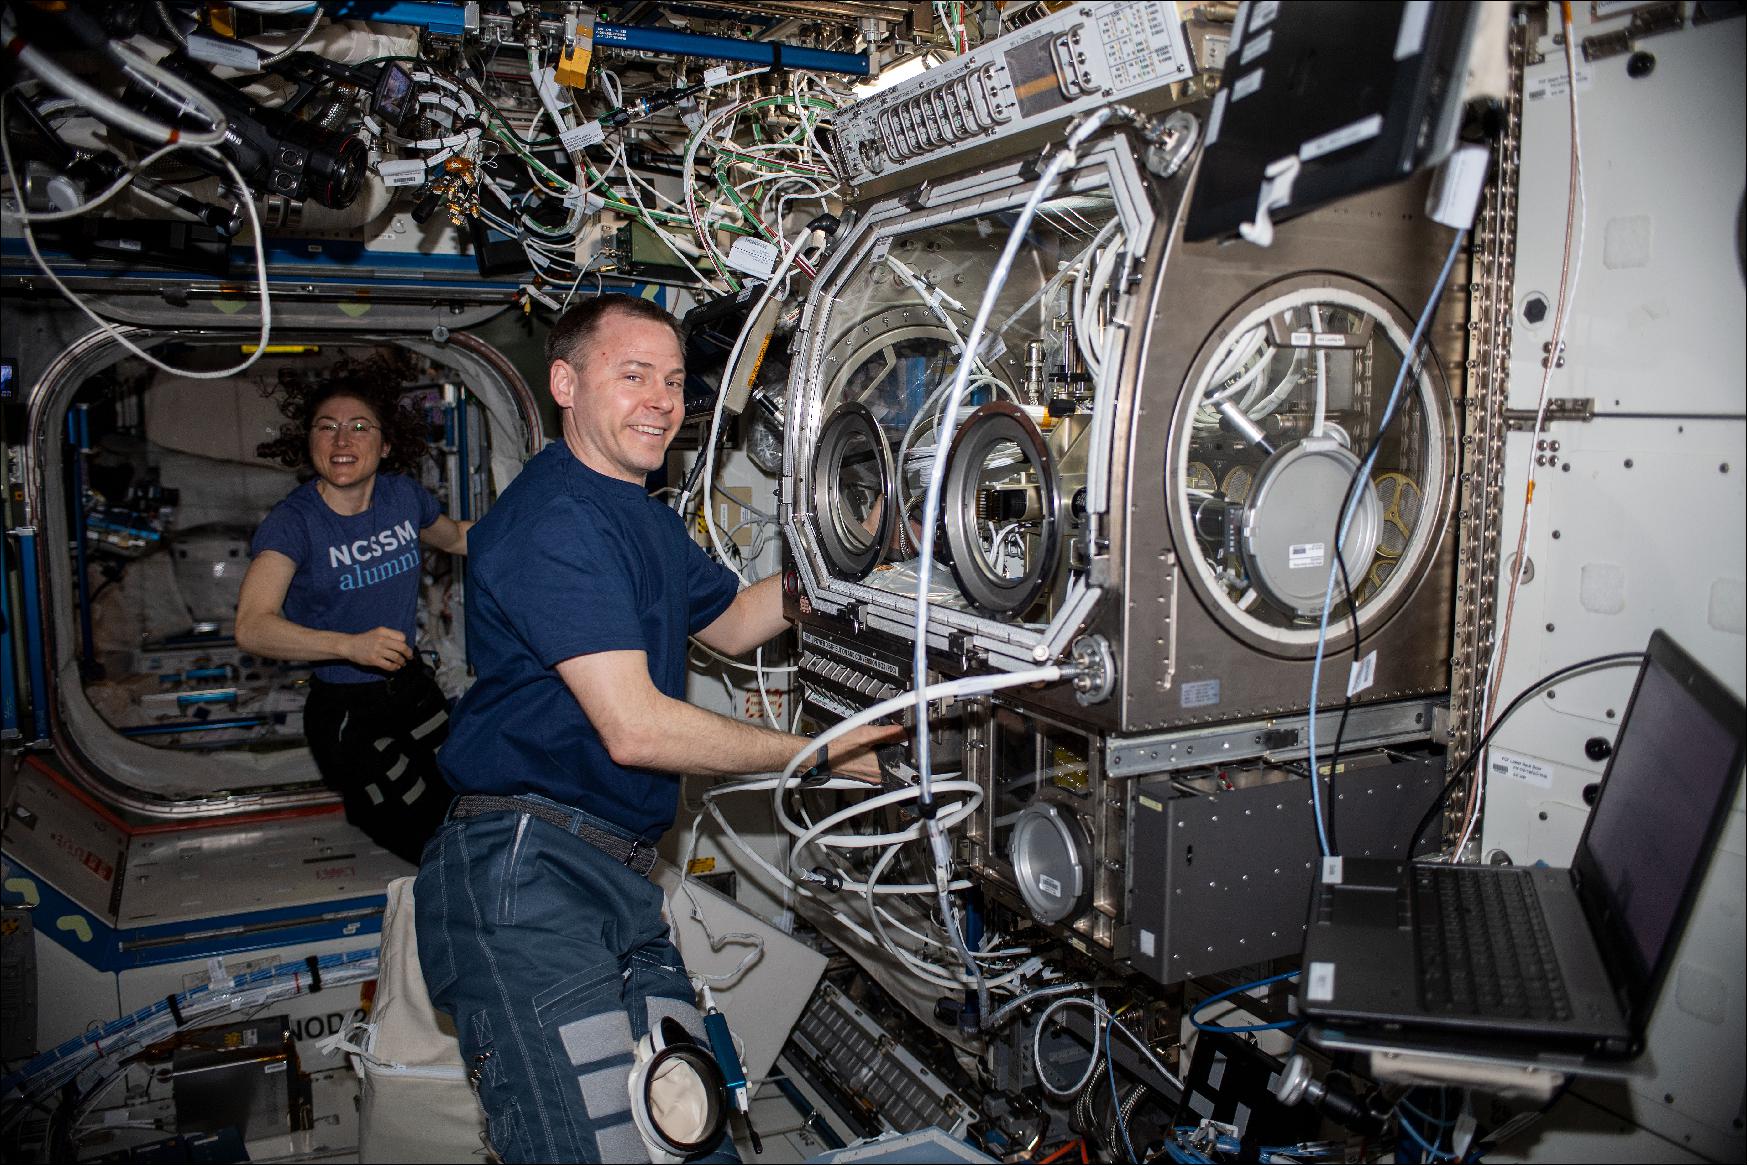 Figure 45: NASA astronaut Nick Hague works on the Ring Sheared Drop investigation in the Microgravity Sciences Glovebox as NASA astronaut Christina Koch observes. Ring Sheared Drop examines the formation and flow of amyloids in microgravity (image credit: NASA)